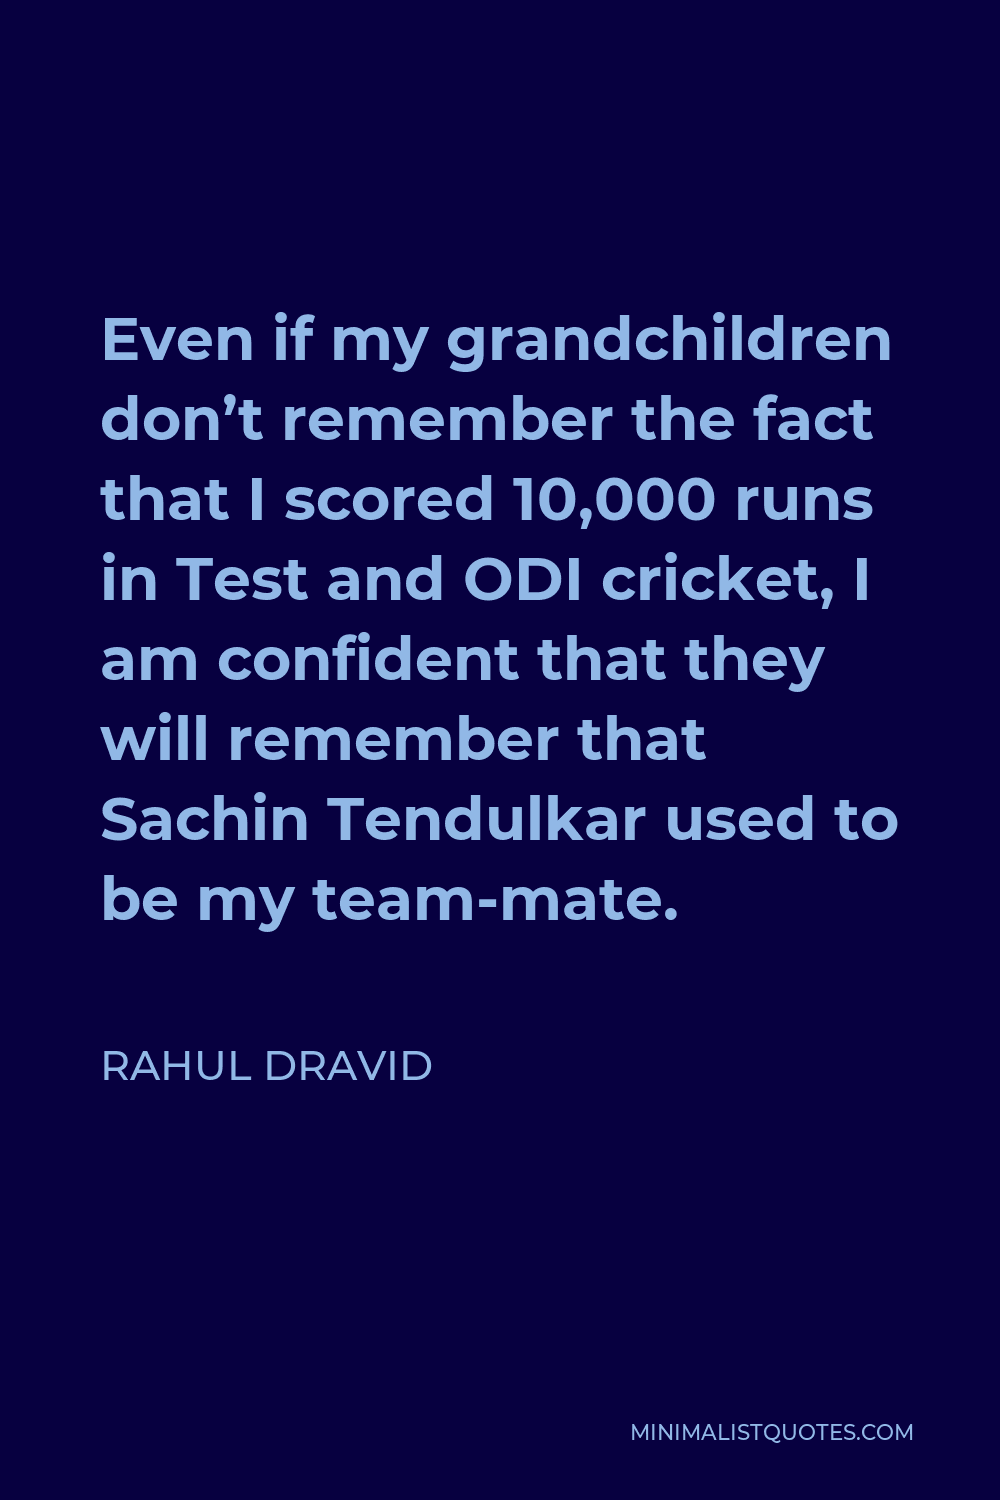 Rahul Dravid Quote - Even if my grandchildren don’t remember the fact that I scored 10,000 runs in Test and ODI cricket, I am confident that they will remember that Sachin Tendulkar used to be my team-mate.